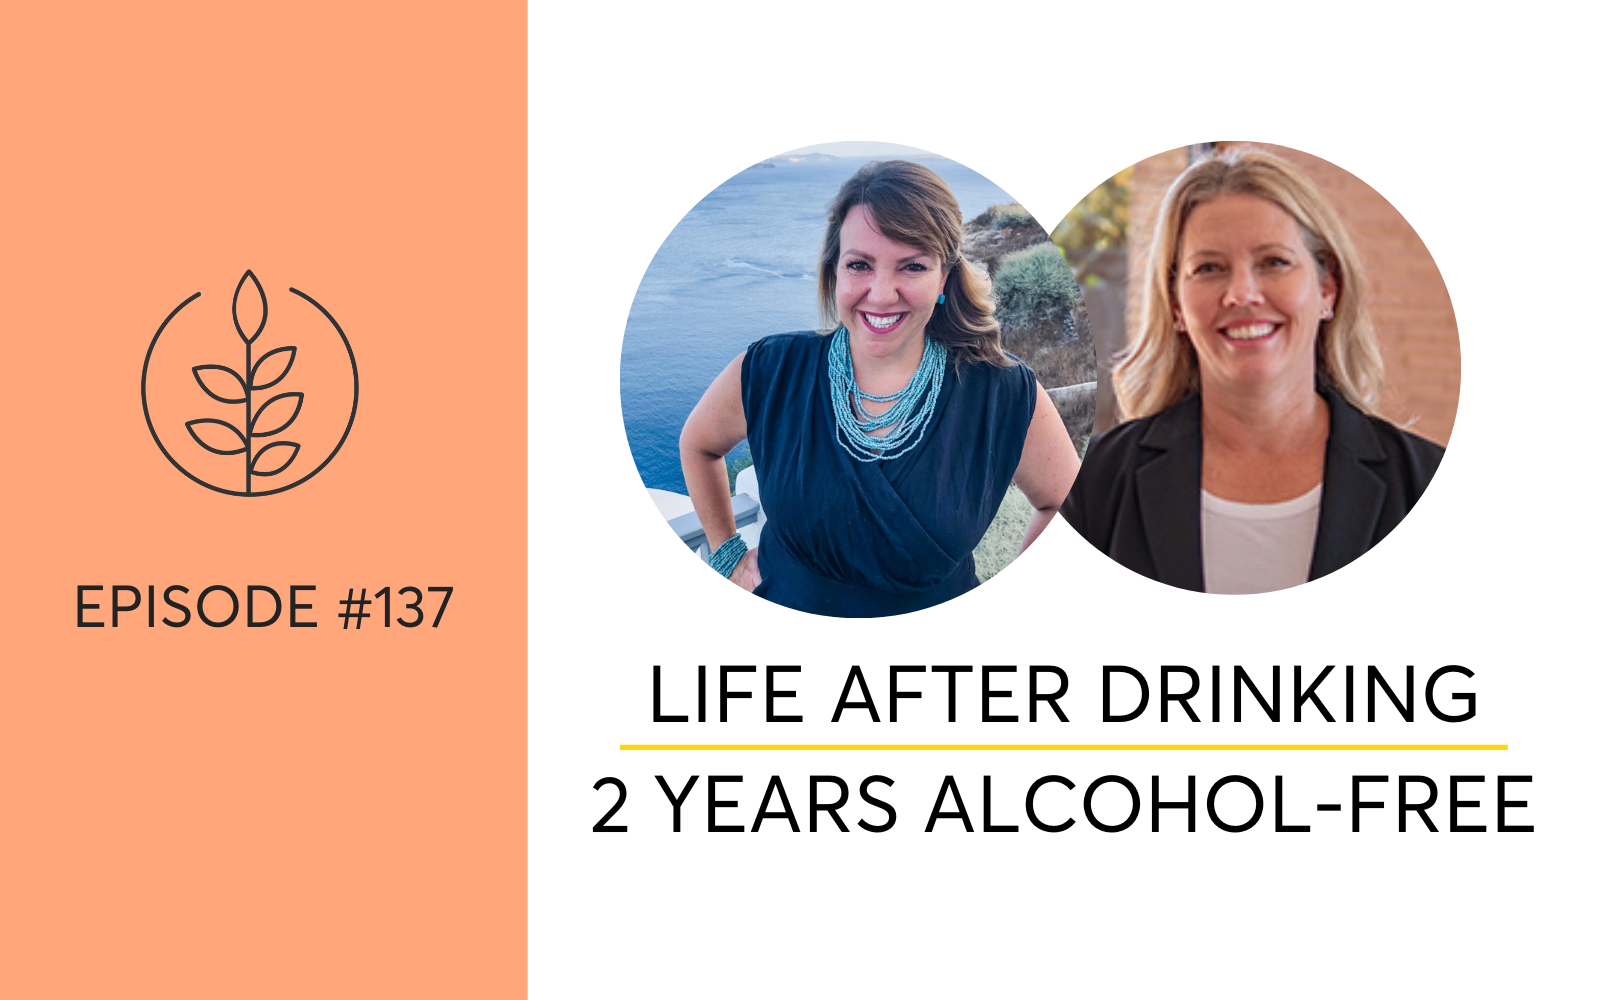 Looking Back At Day 1 From Two Years Alcohol-Free